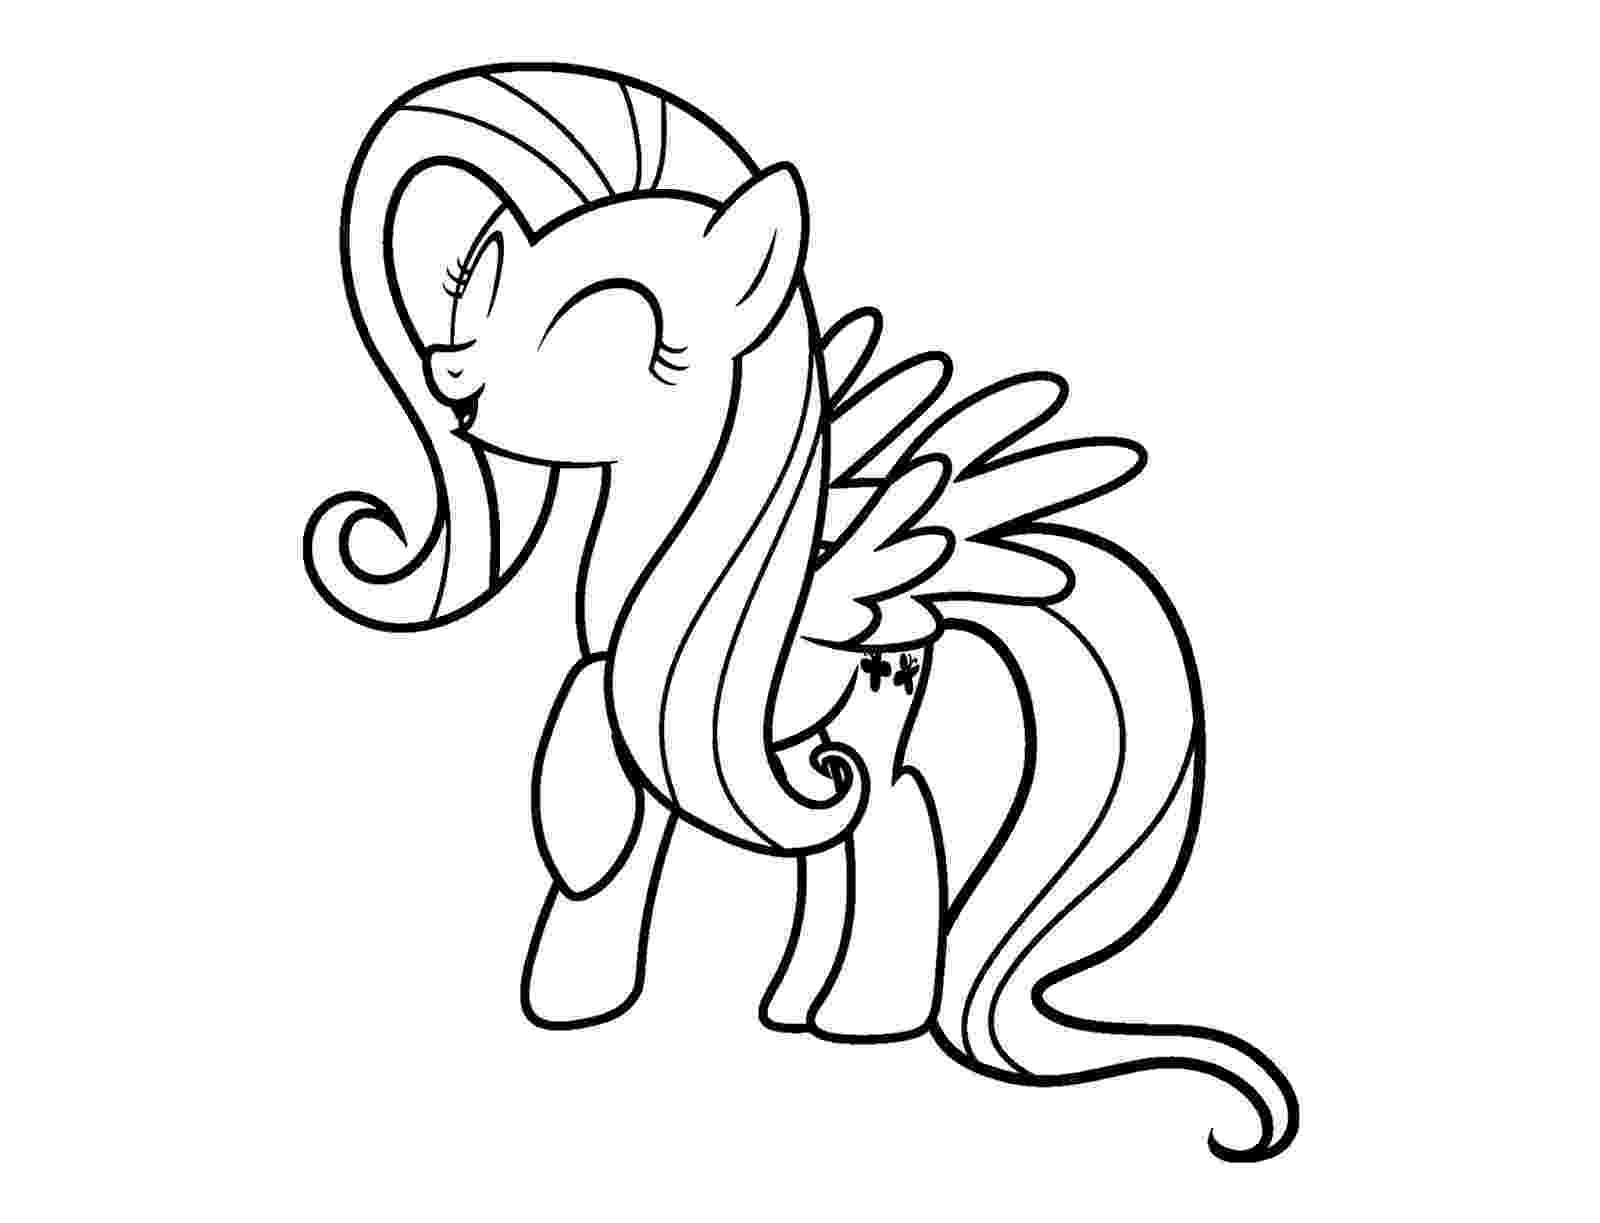 coloring pages of fluttershy fluttershy coloring pages best coloring pages for kids coloring pages of fluttershy 